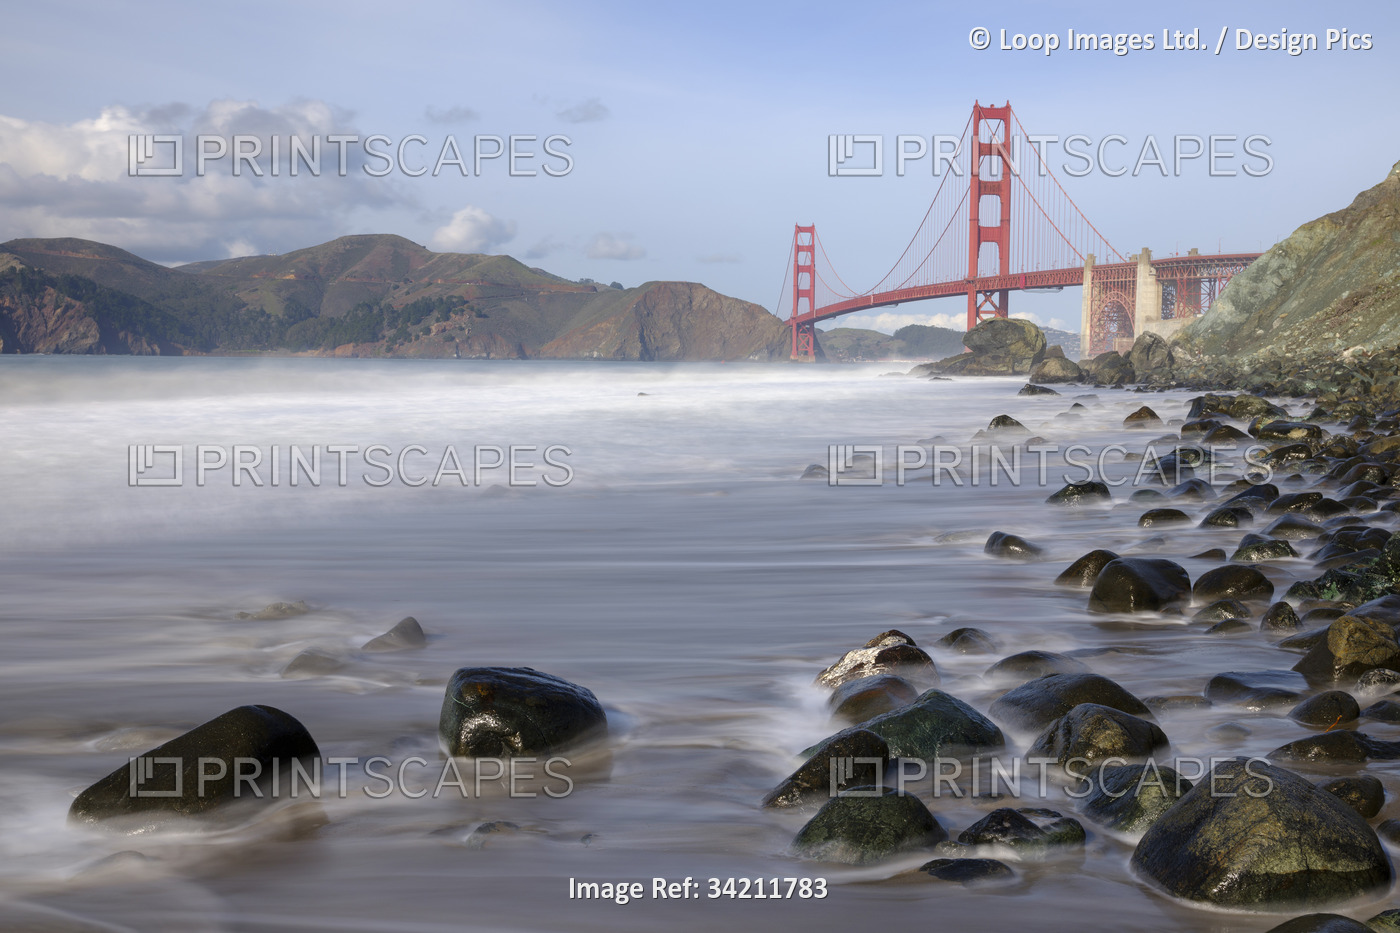 The Golden Gate Bridge in San Francisco viewed from Marshall's Beach.